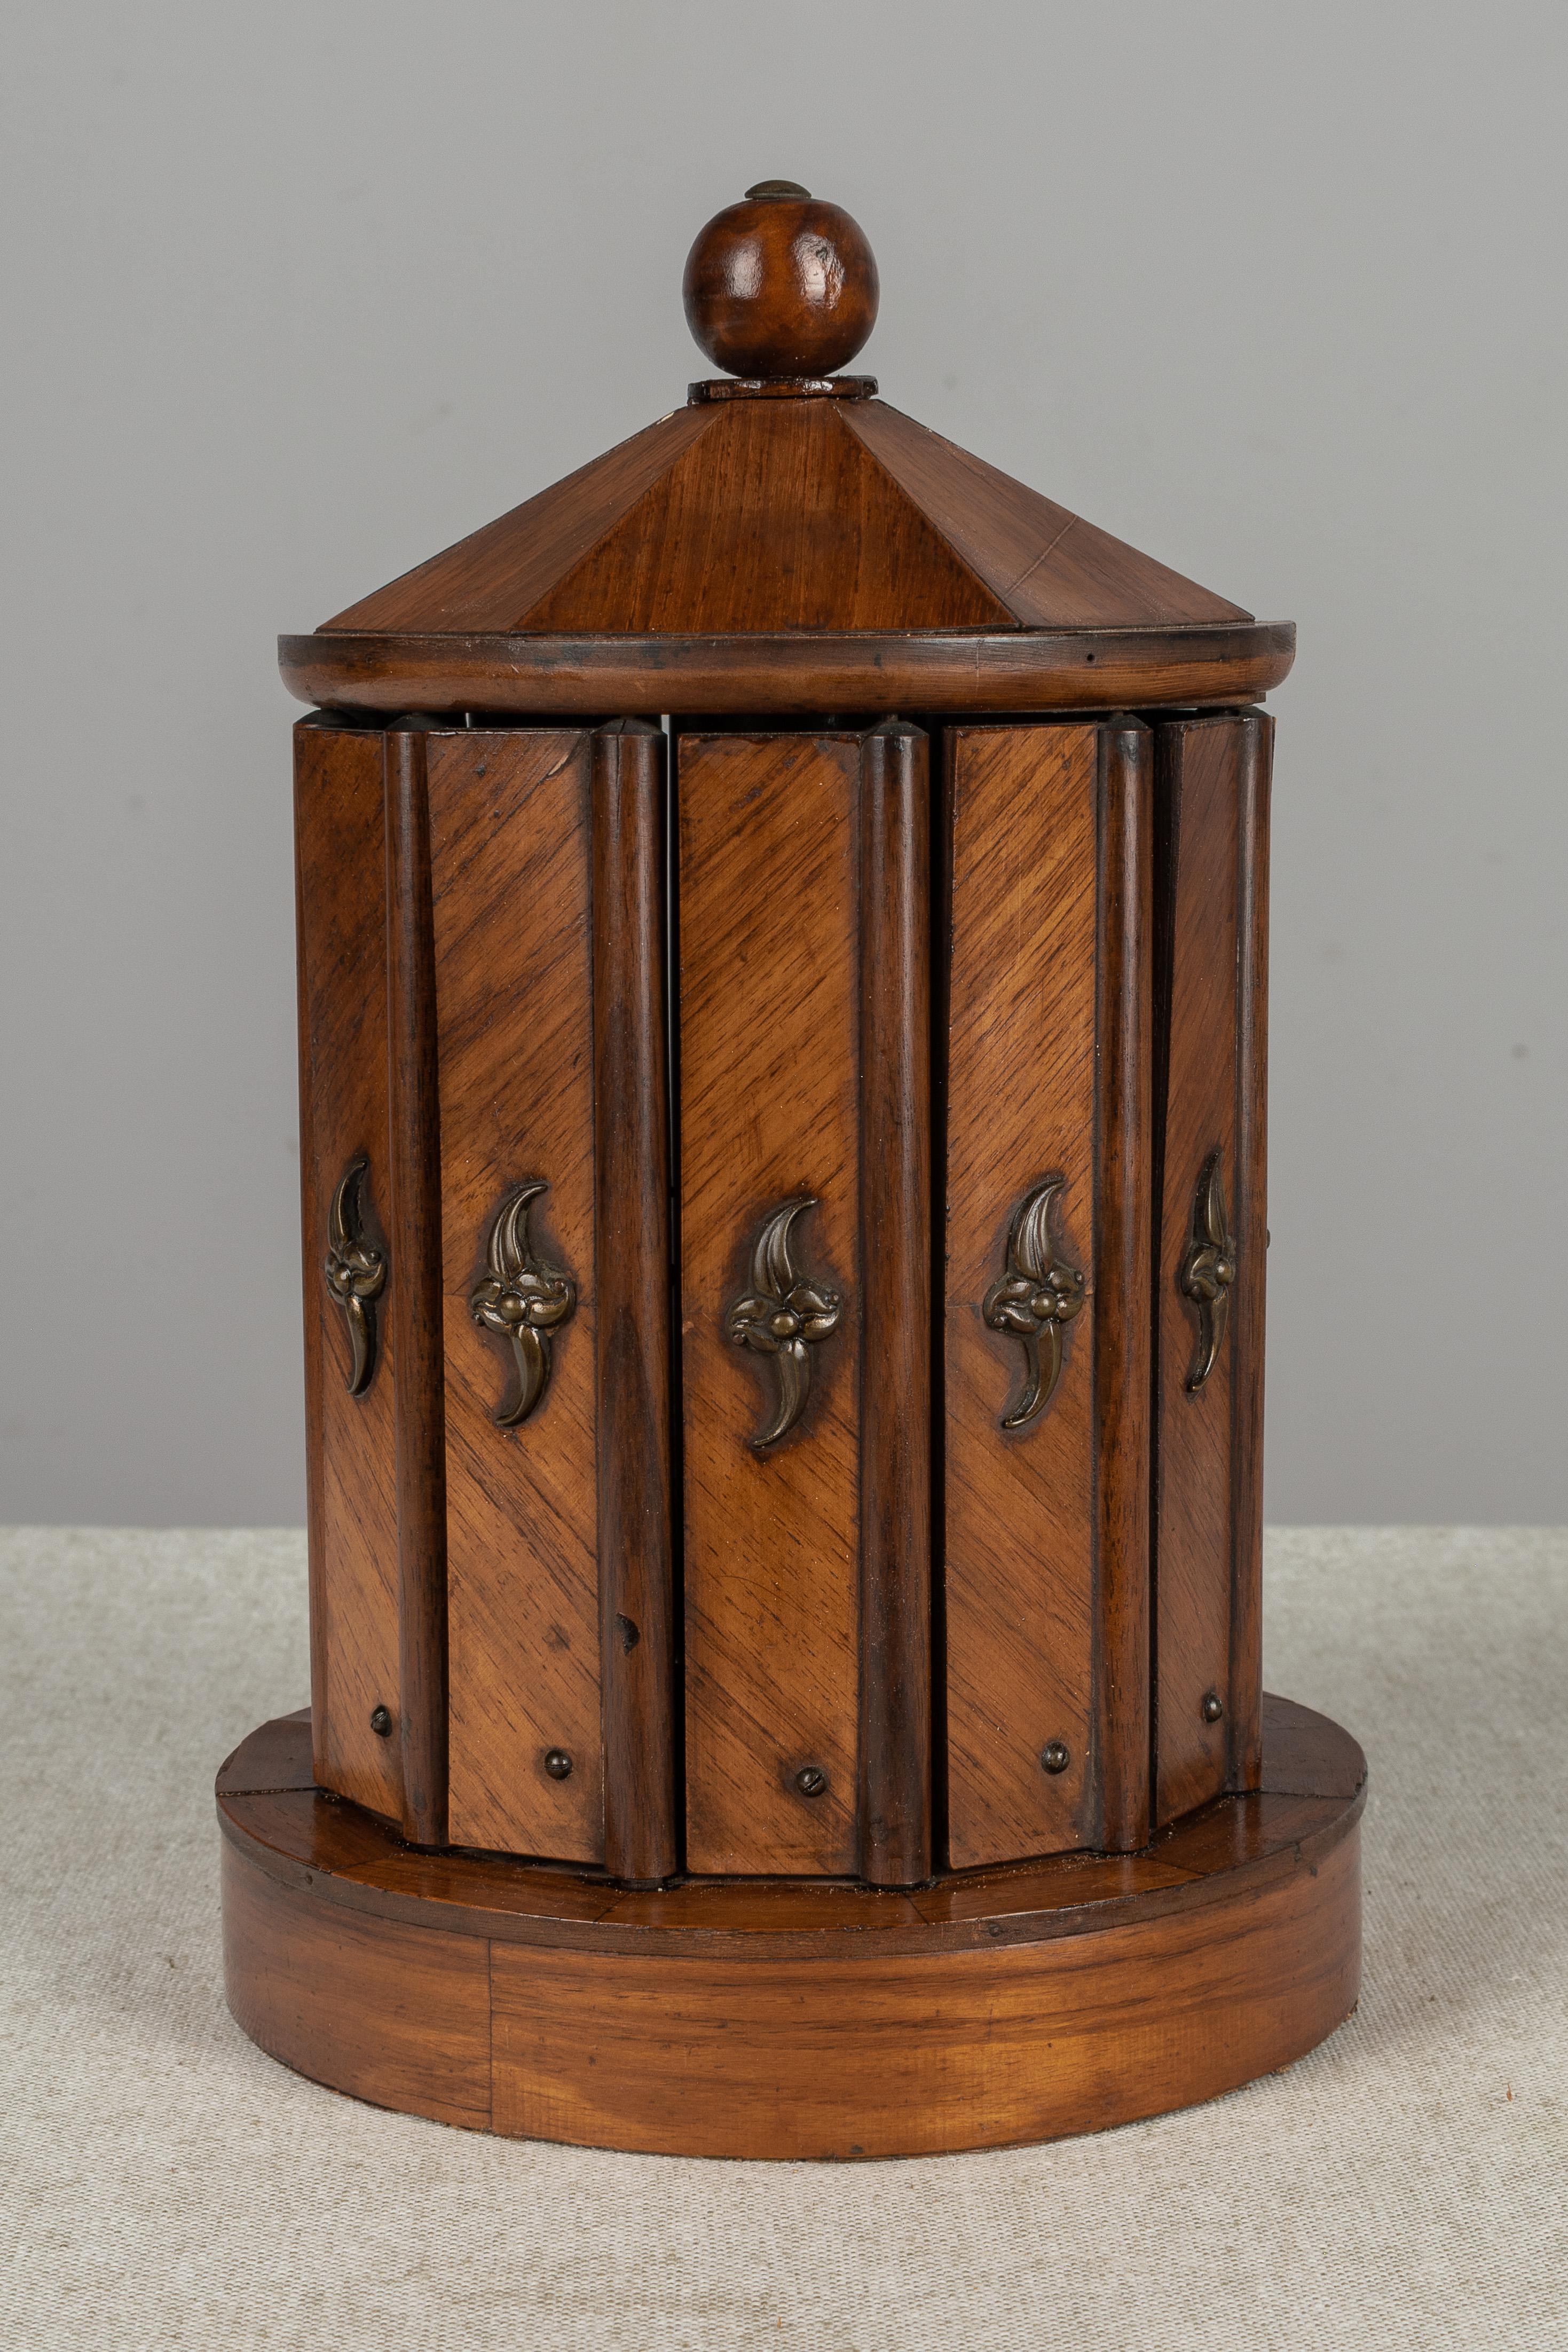 An unusual 19th century French circular cave à cigar, or cigar box, made of mahogany with decorative brass hardware. A clever mechanism, the louvered slats open by a turn of the knob at the top, revealing loops that hold twelve cigars. Fine